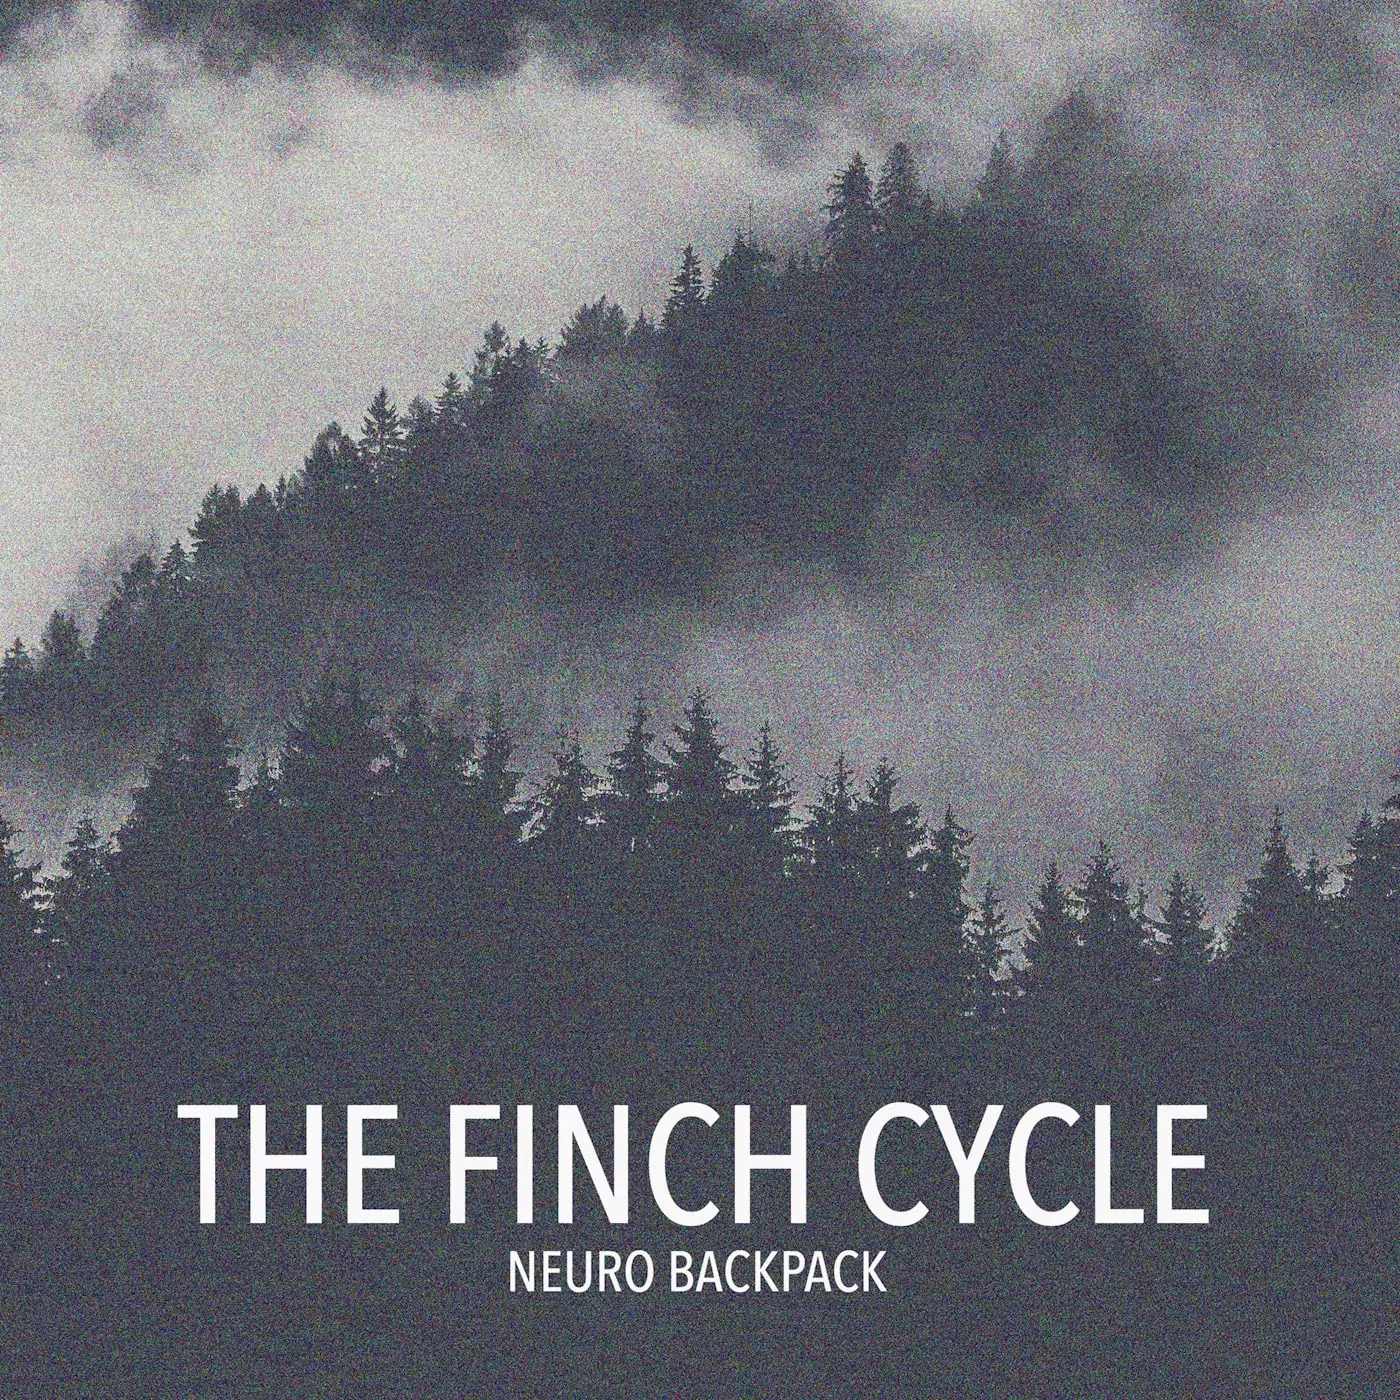 The Finch Cycle